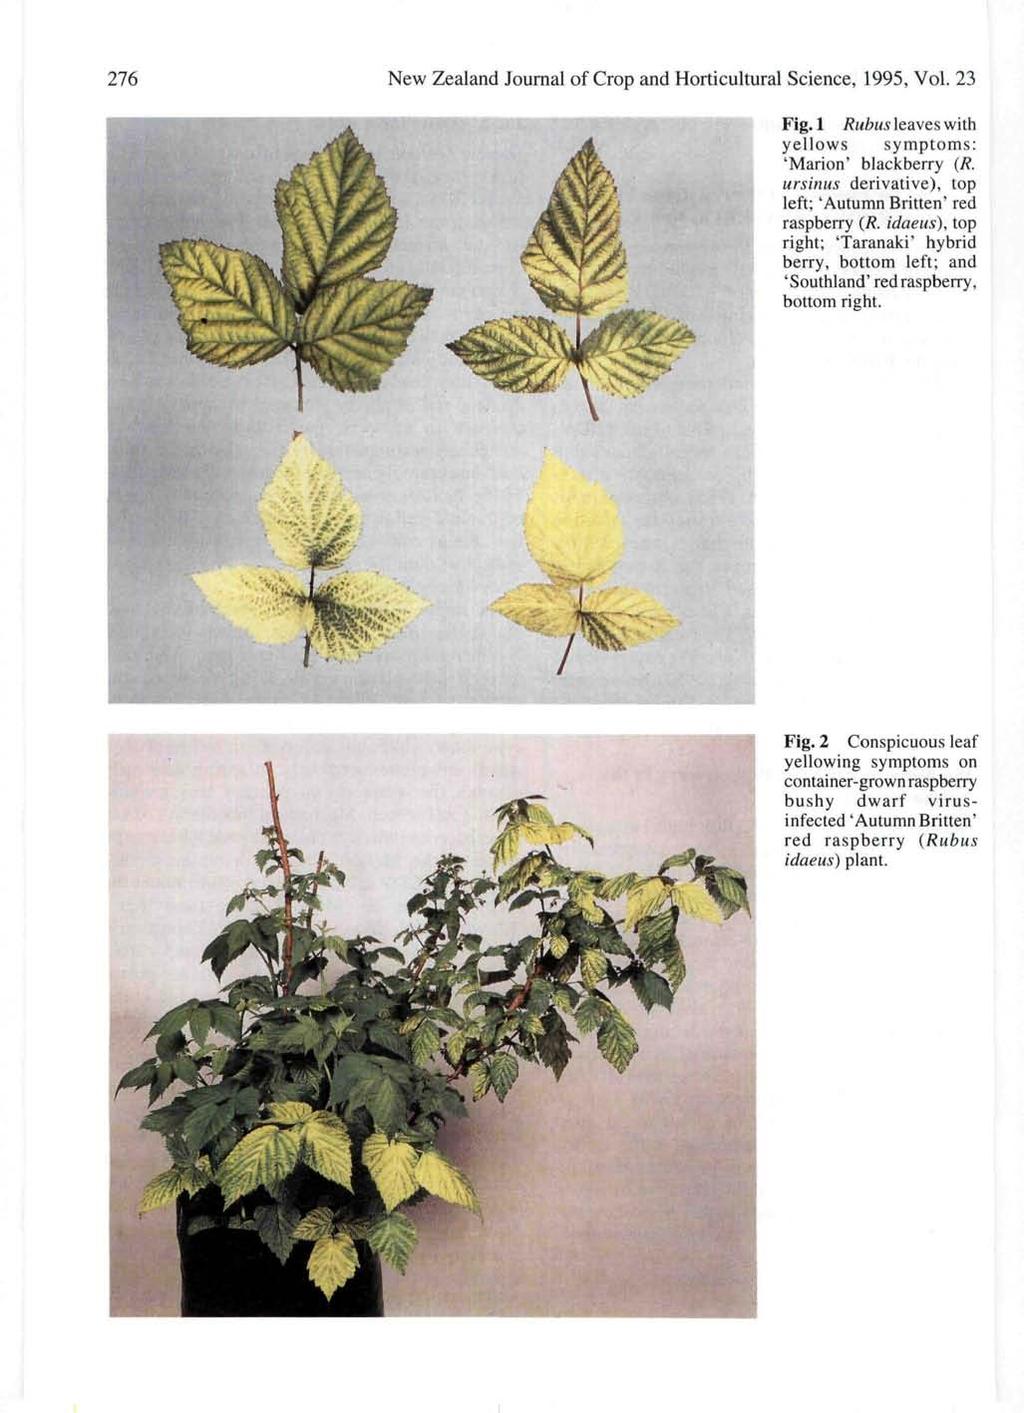 27 New Zealand Journal of Crop and Horticultural Science, 1995, Vol. 23 Fig. 1 Rubus leaves with yellows symptoms: 'Marion' blackberry (R.